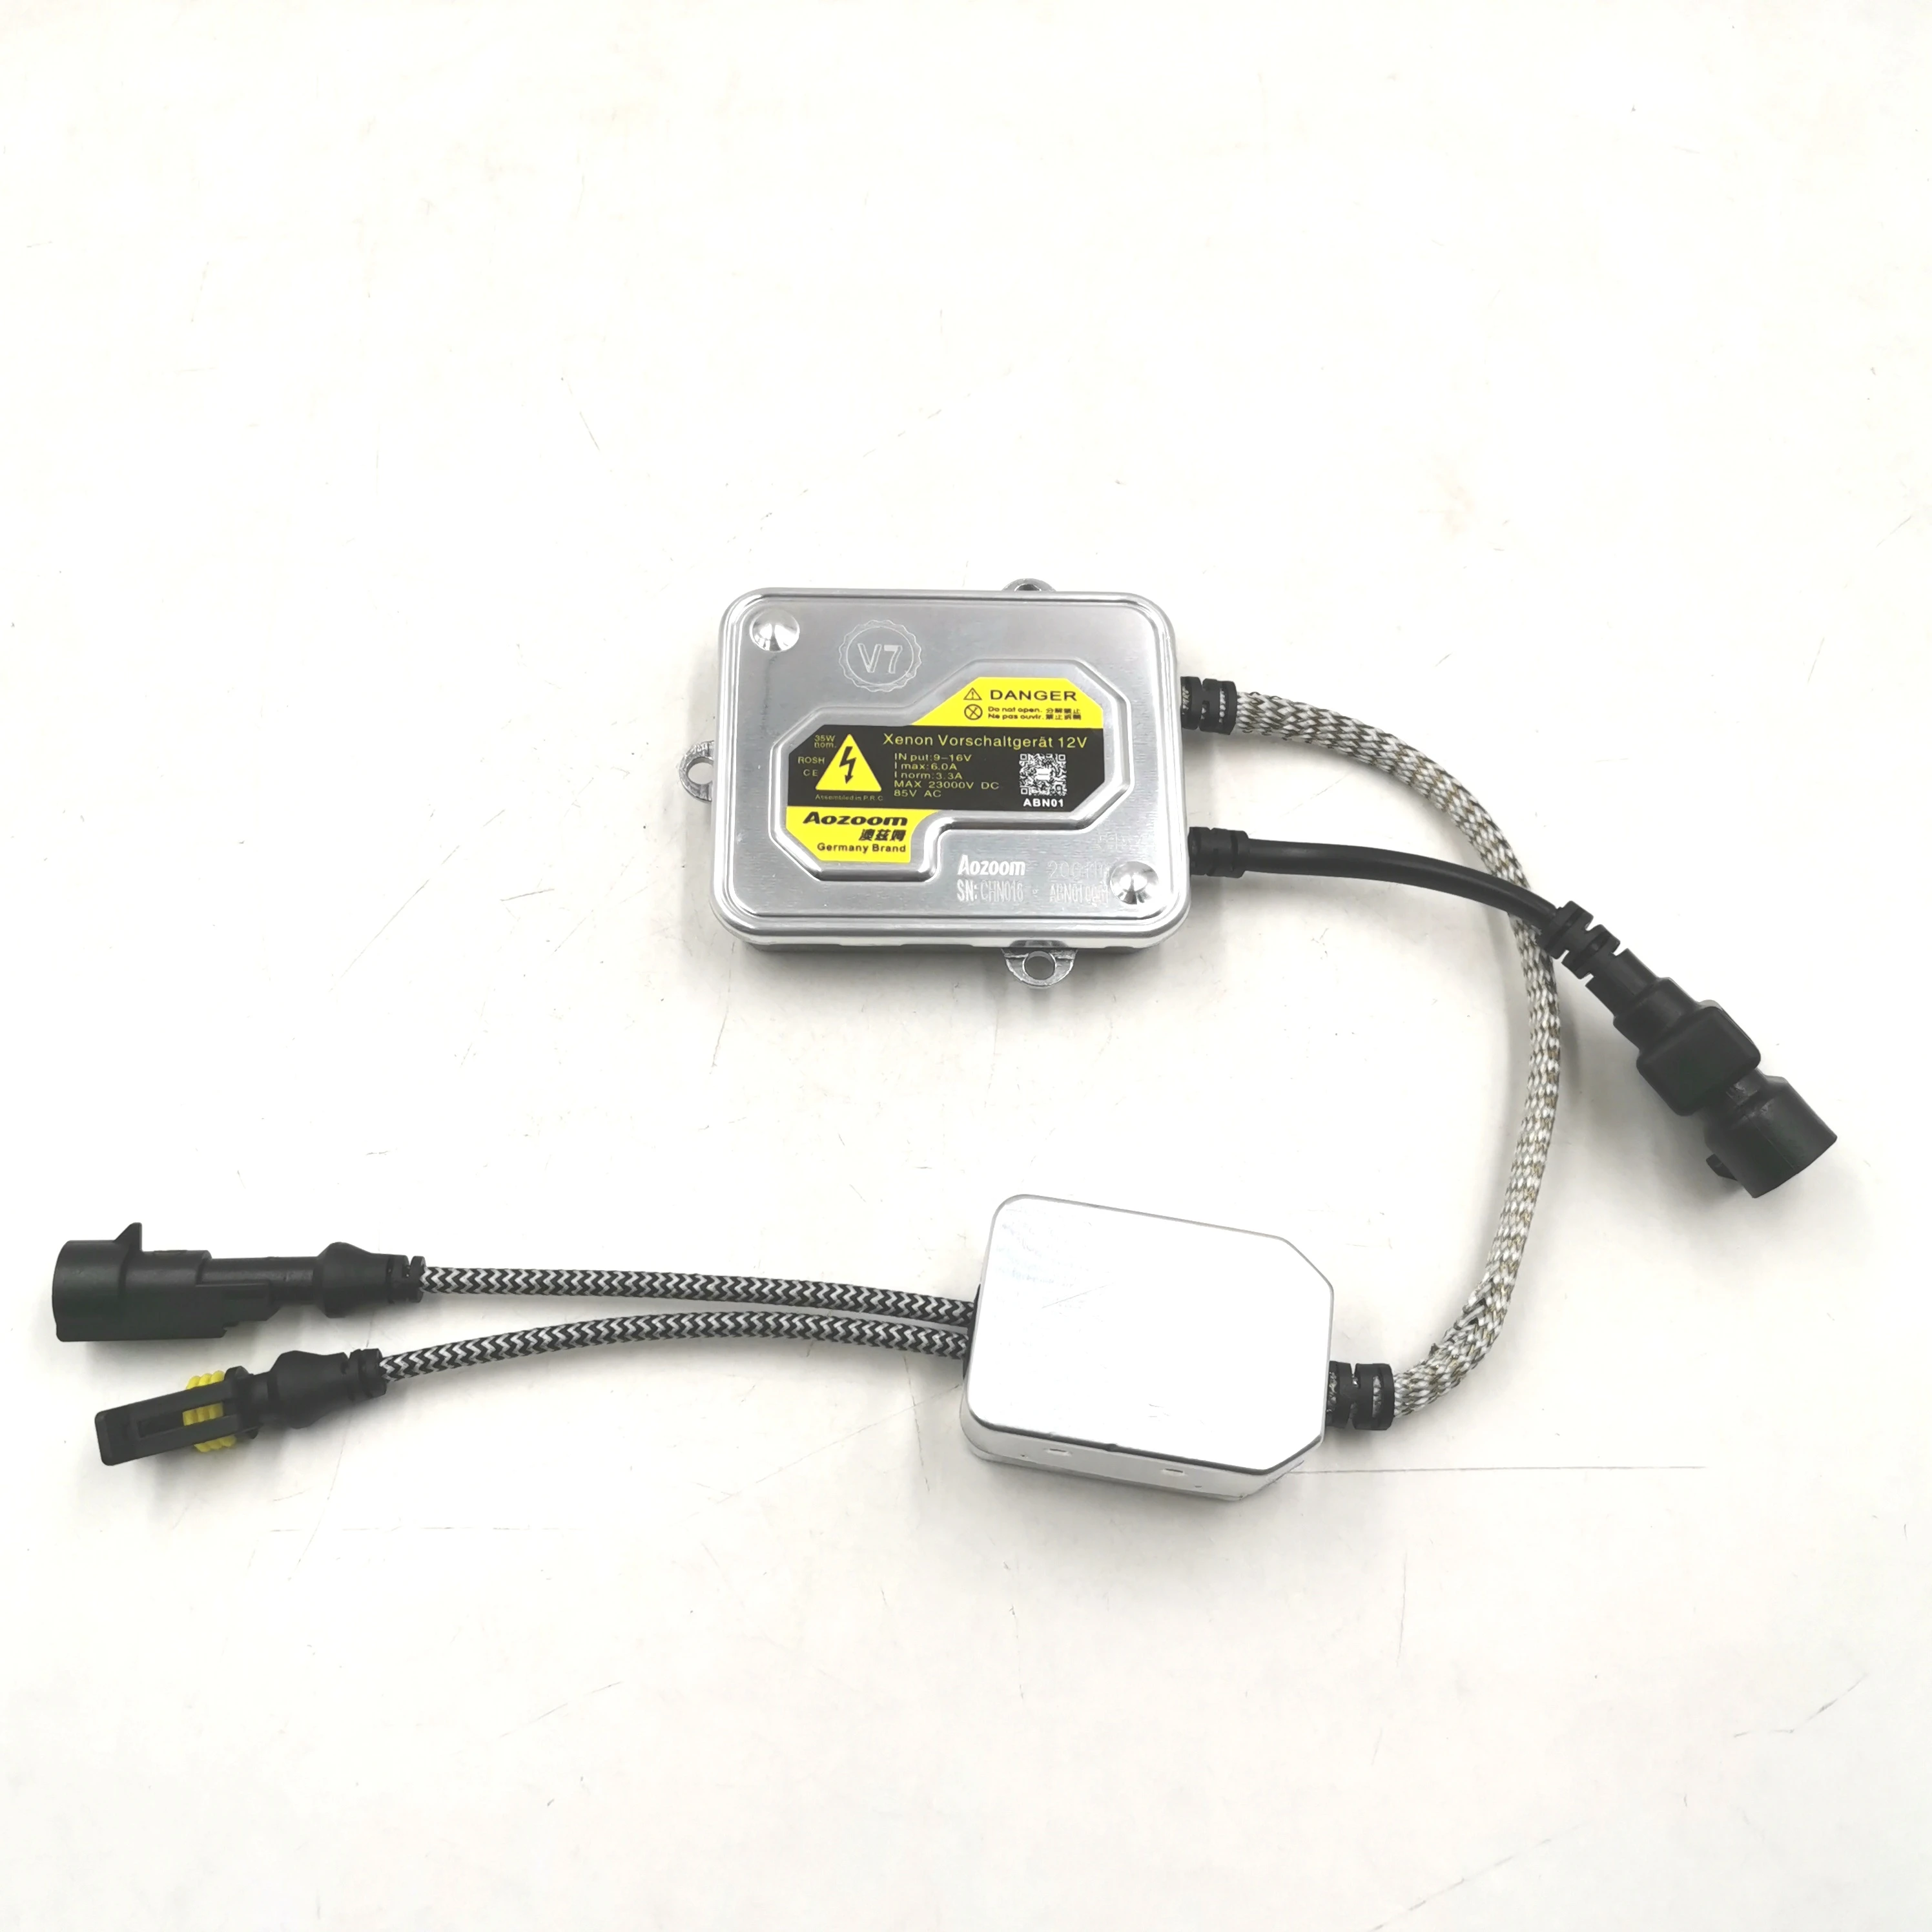 Aozoom electronic ballast for HID lamp Fast start Xenon Ballast hid ballast aozoom quick start error free canbus 35W/55W